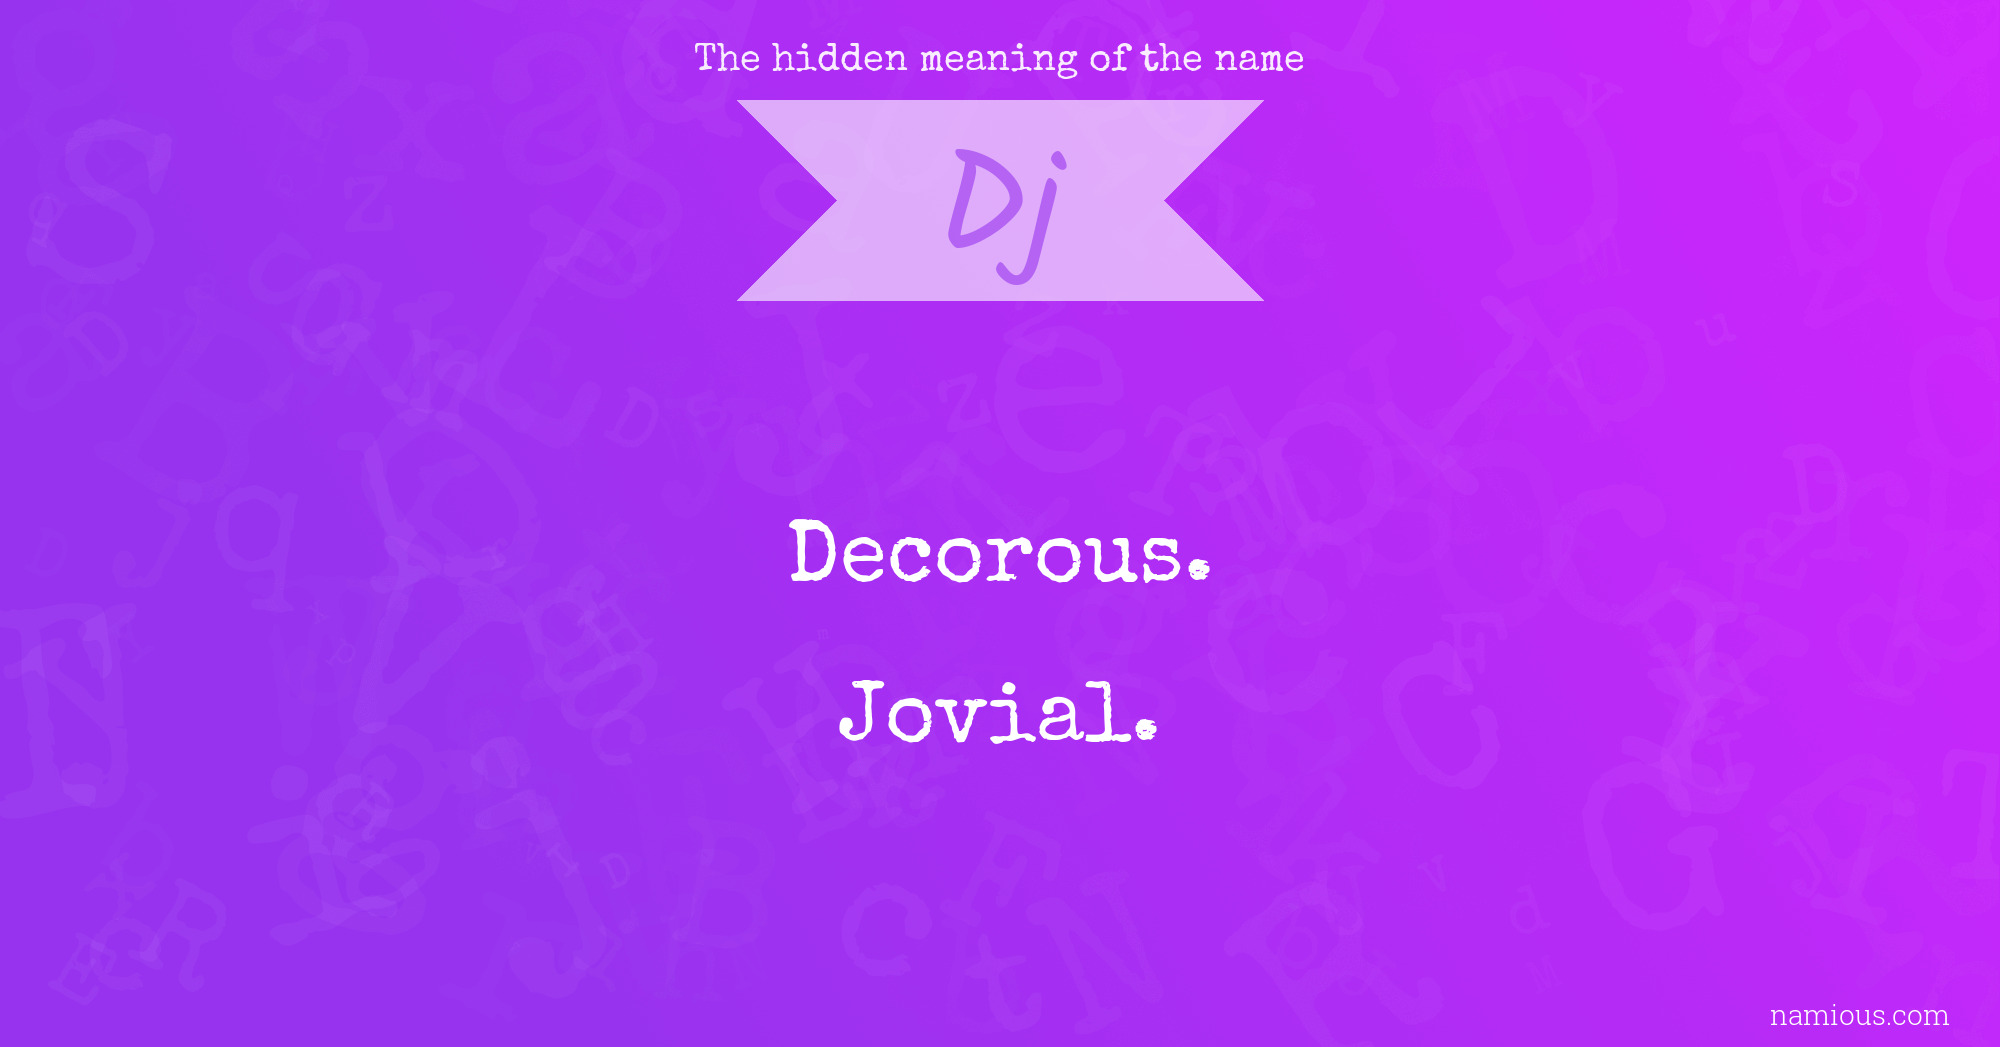 The hidden meaning of the name Dj